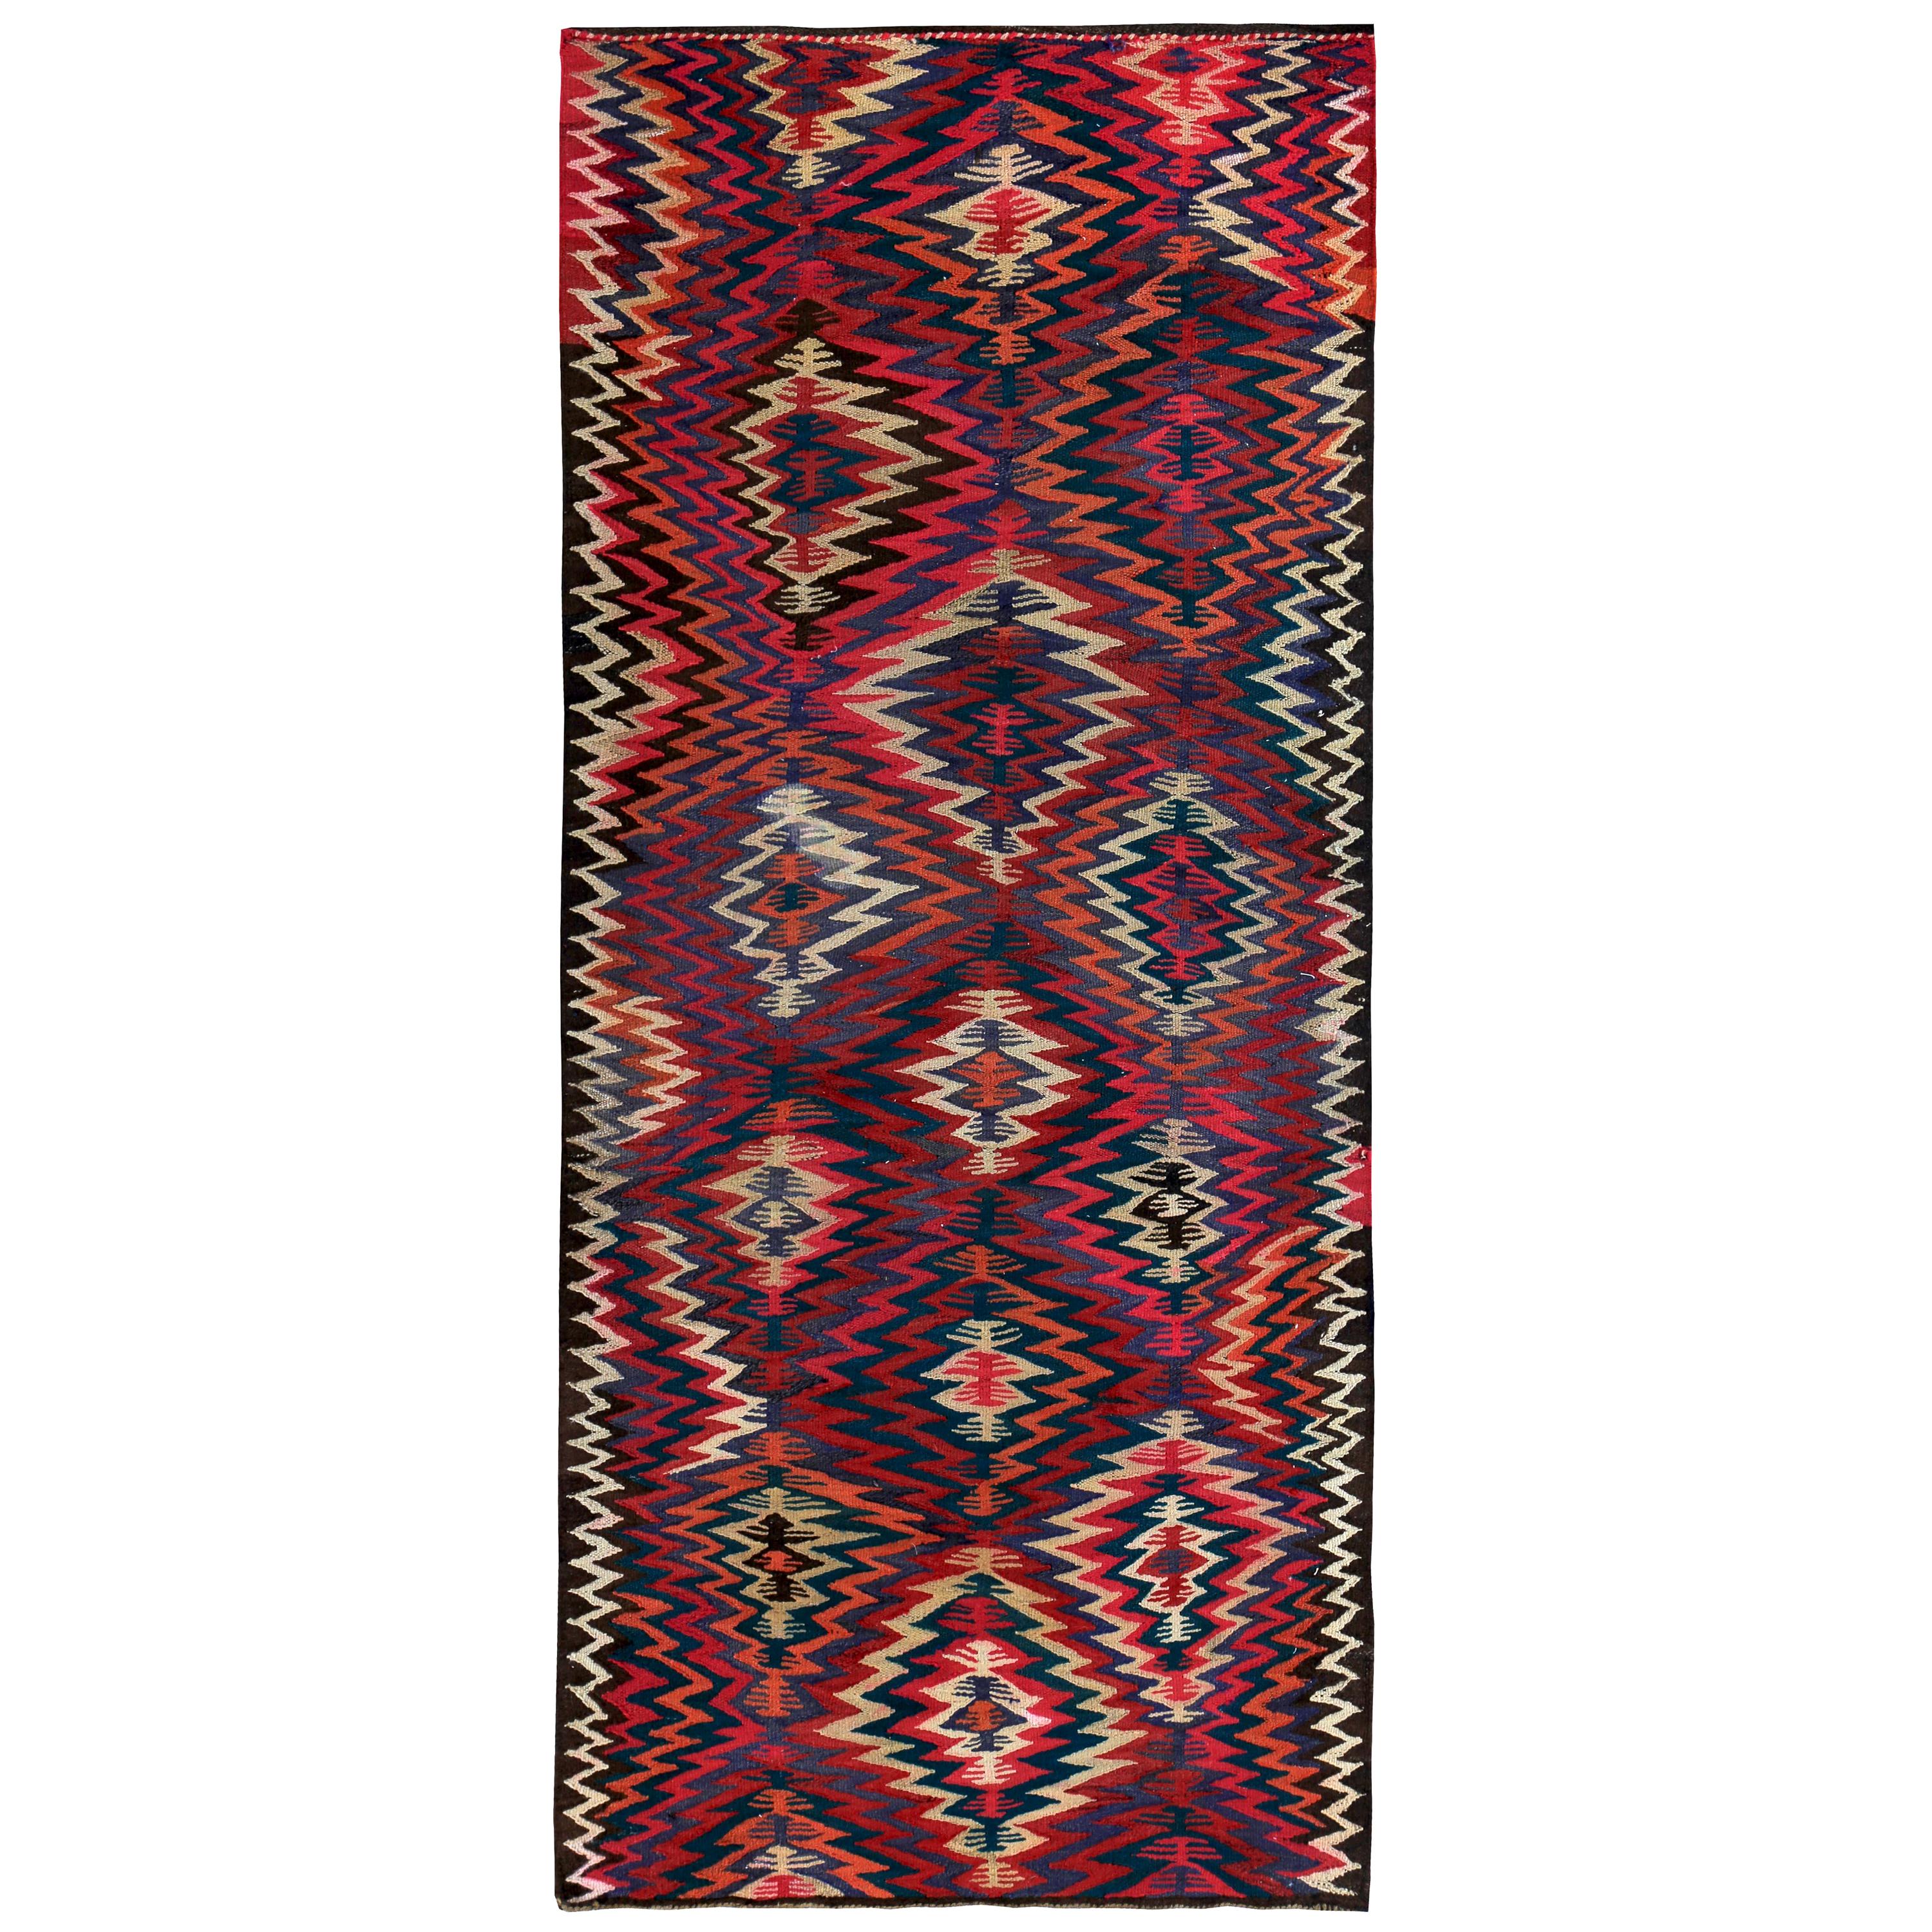 Turkish Kilim Runner Rug with Tribal Details in Pink, Red and Purple